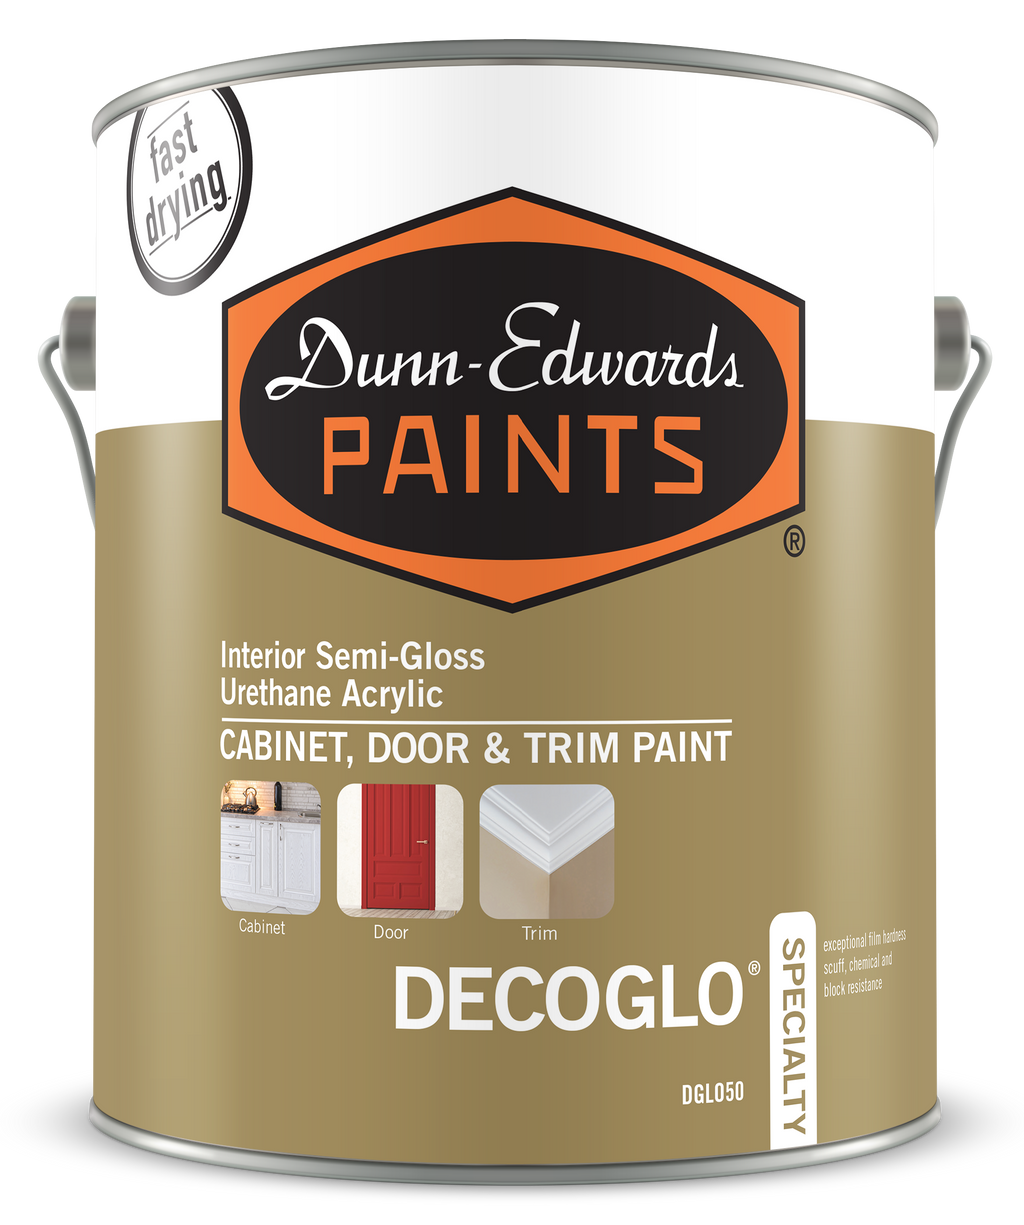 Real Milk Paint, Wood Paint for Furniture, Matte Paint for Cabinets, Walls,  Brick, and Stone, Water Based Organic, No VOC, Terra Cotta, 1 Quart